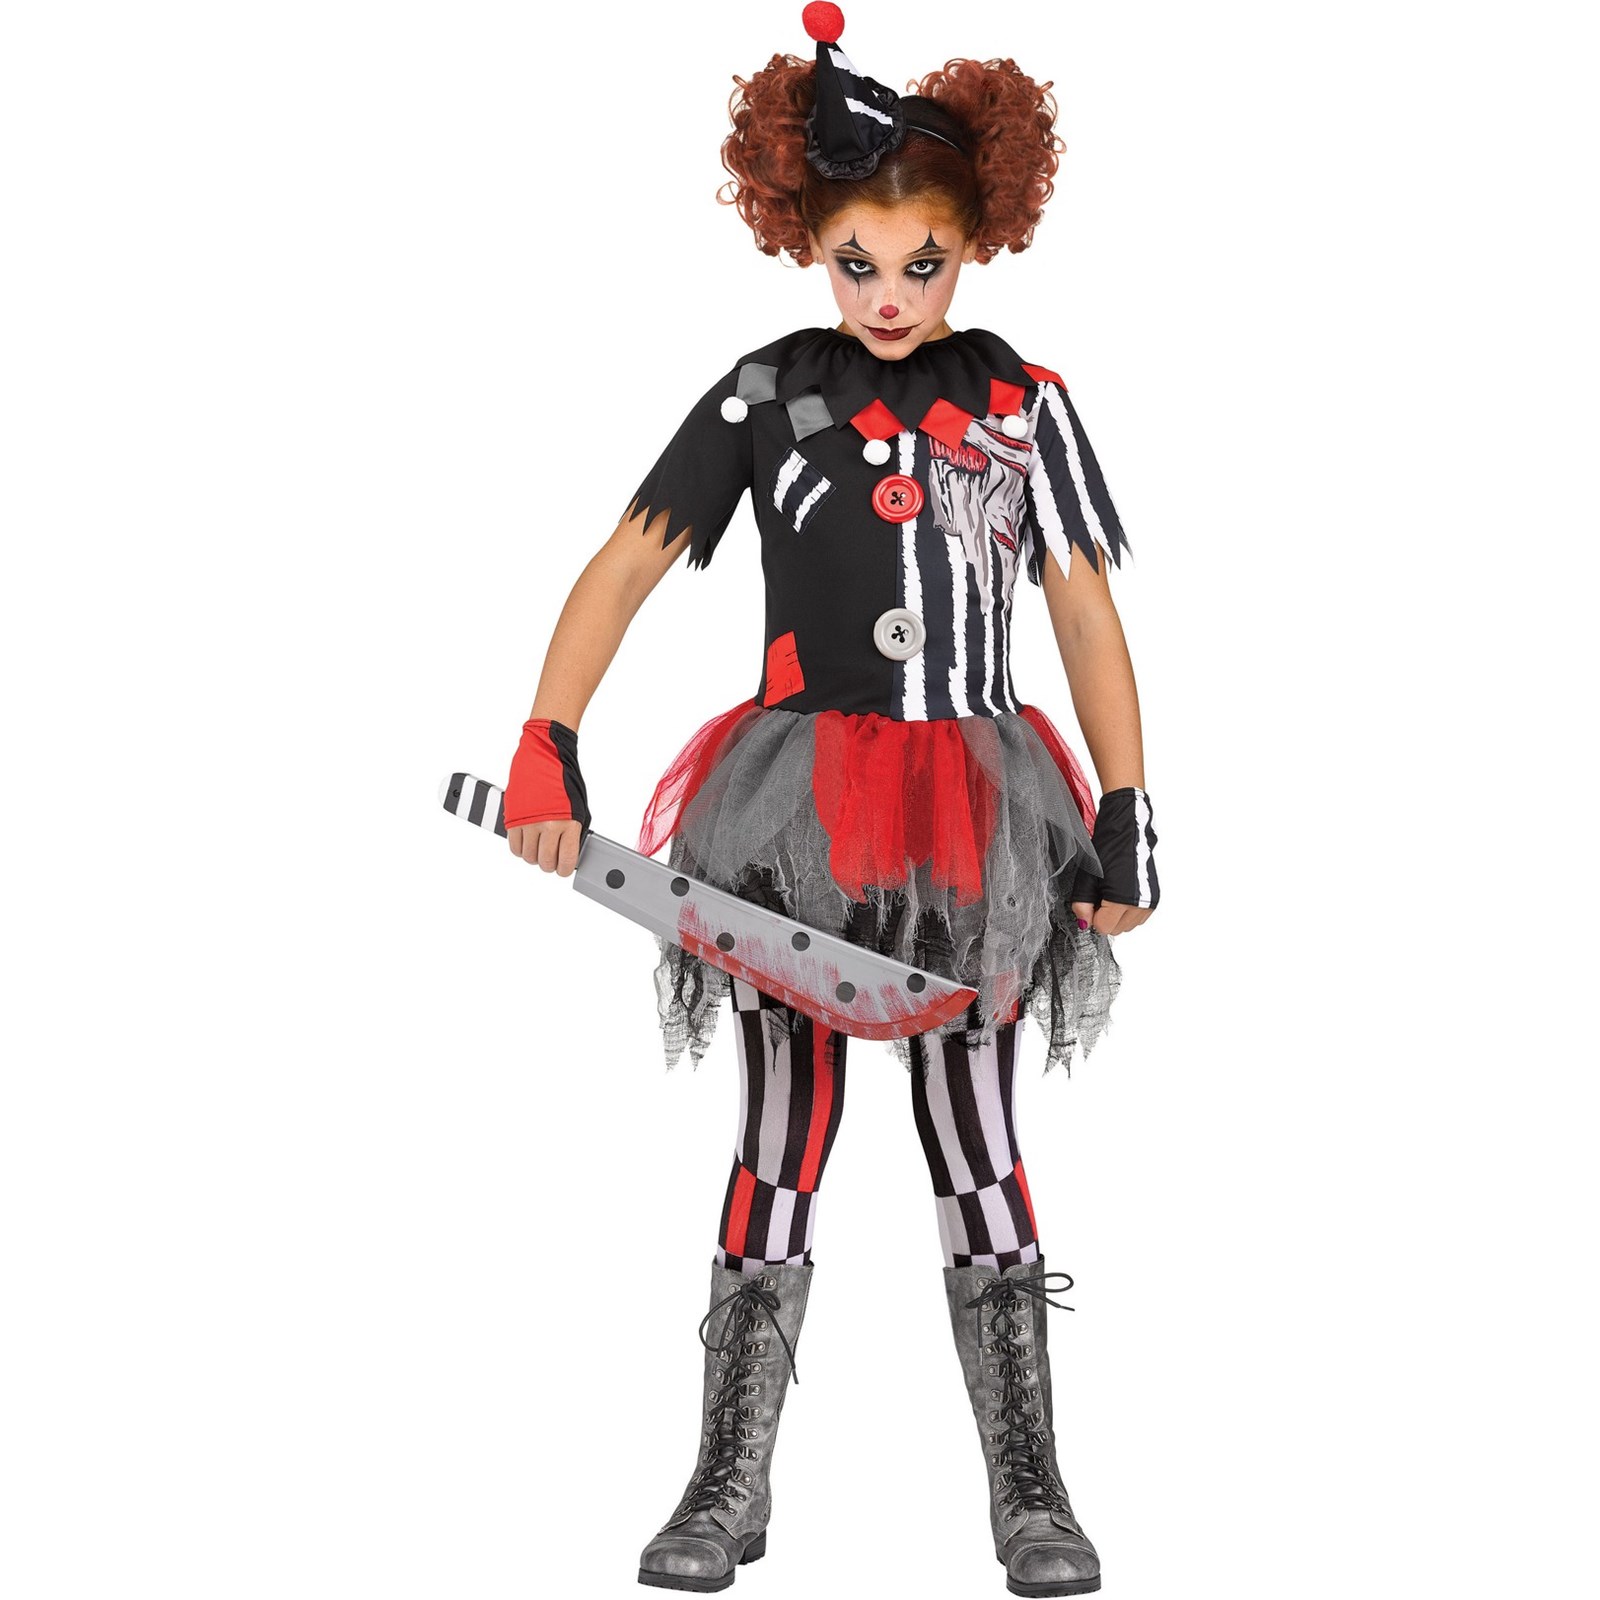 Fun World Sinister Circus Girl's Halloween Fancy-Dress Costume for Child, XL - image 1 of 3